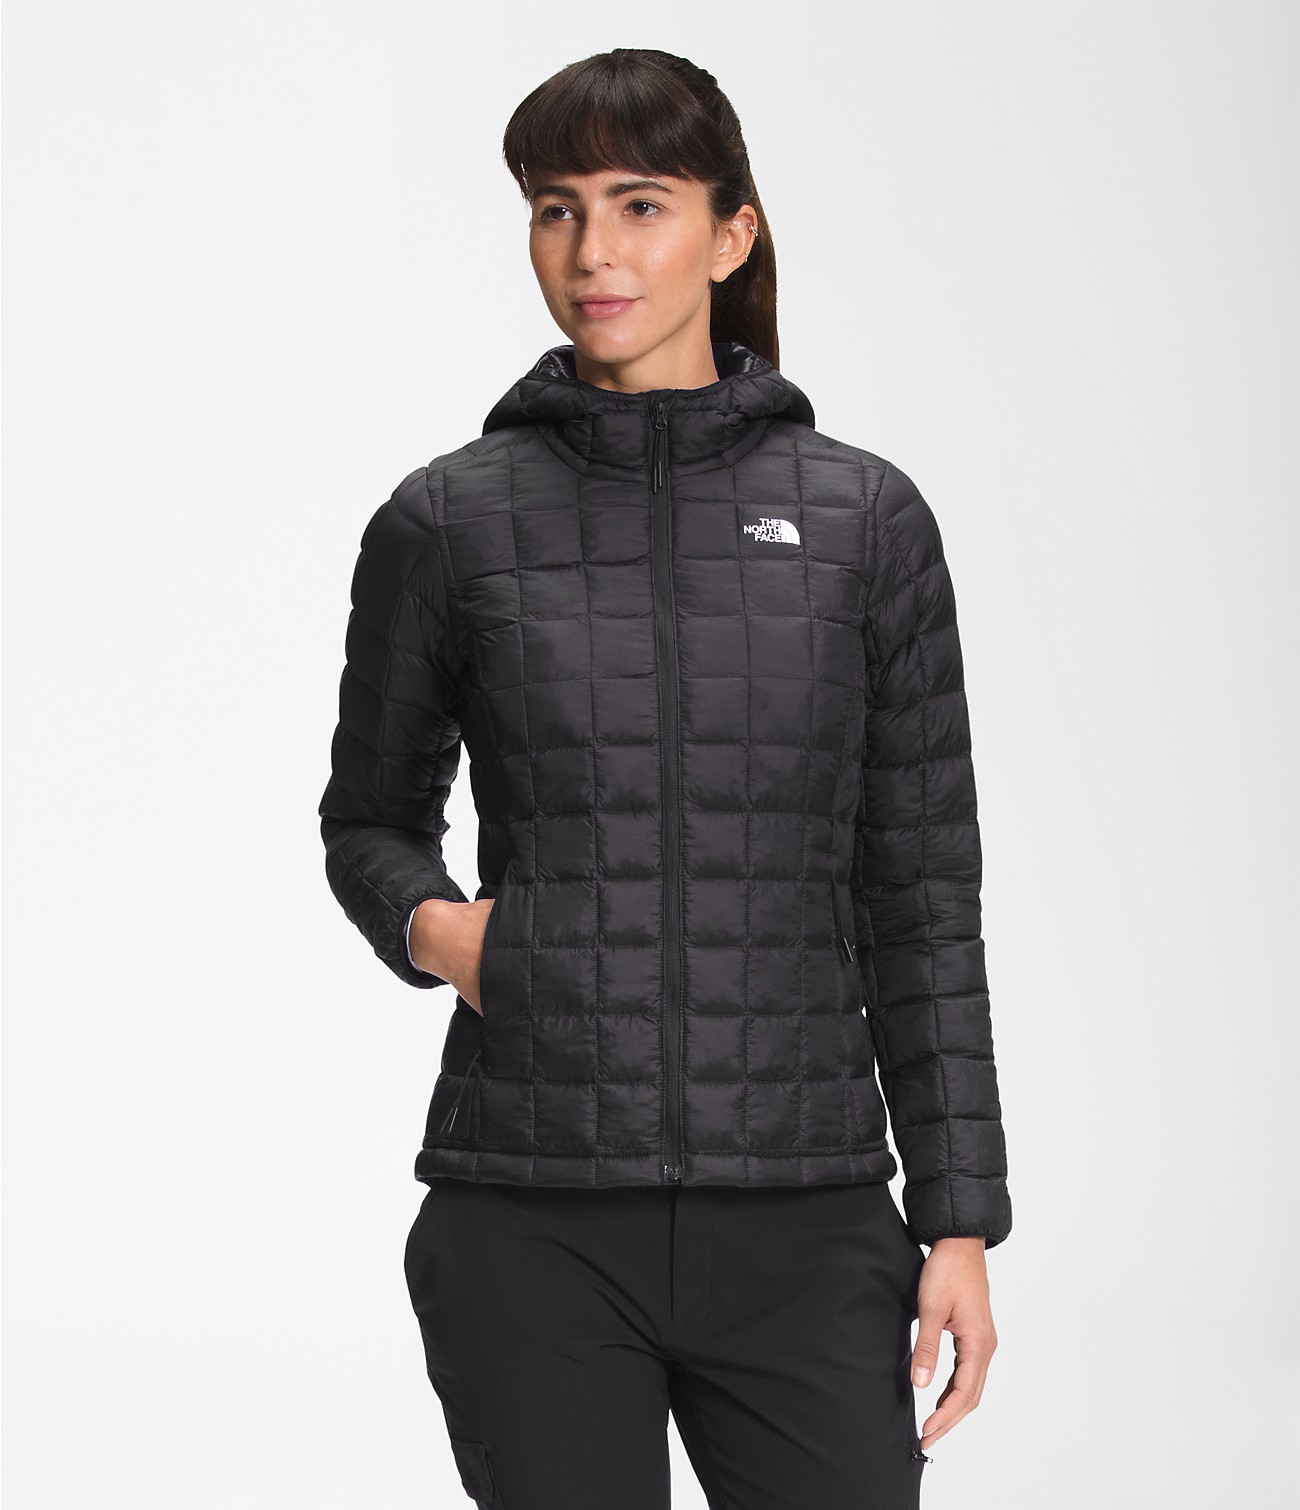 Unlock Wilderness' choice in the Lululemon Vs North Face comparison, the ThermoBall™ Eco Hoodie 2.0 by The North Face